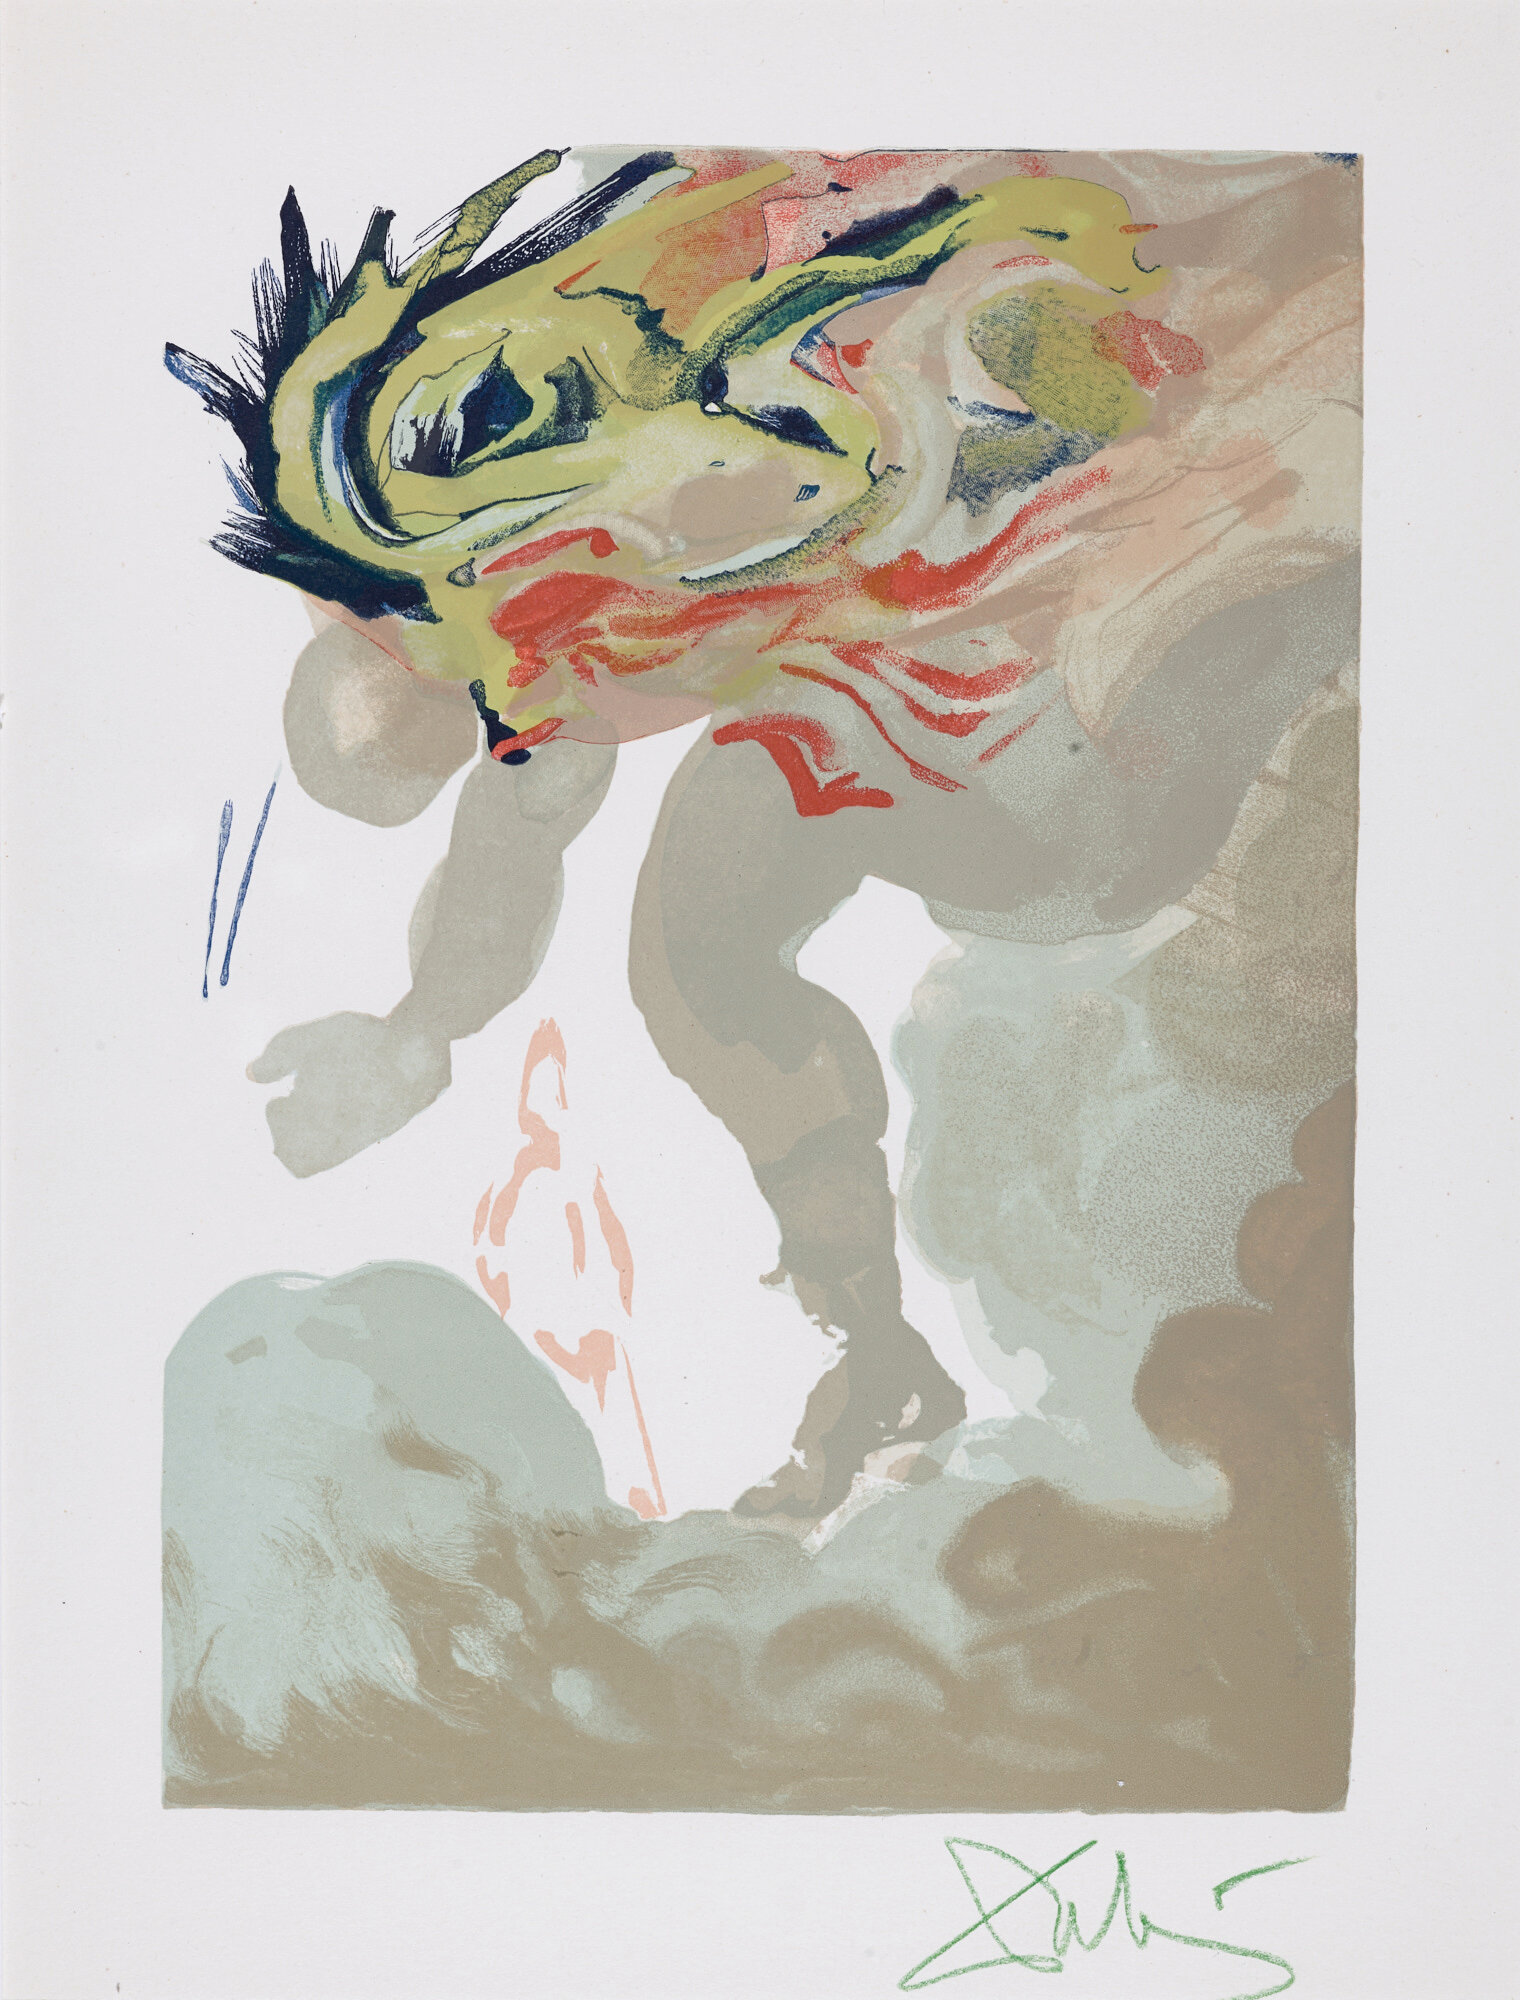   Salvador Dalí (1904-1989) From the Portfolio  The Divine Comedy: Inferno   Serigraph, c. 1960 The Noble Maritime Collection  Gift of Barnett Shepherd  